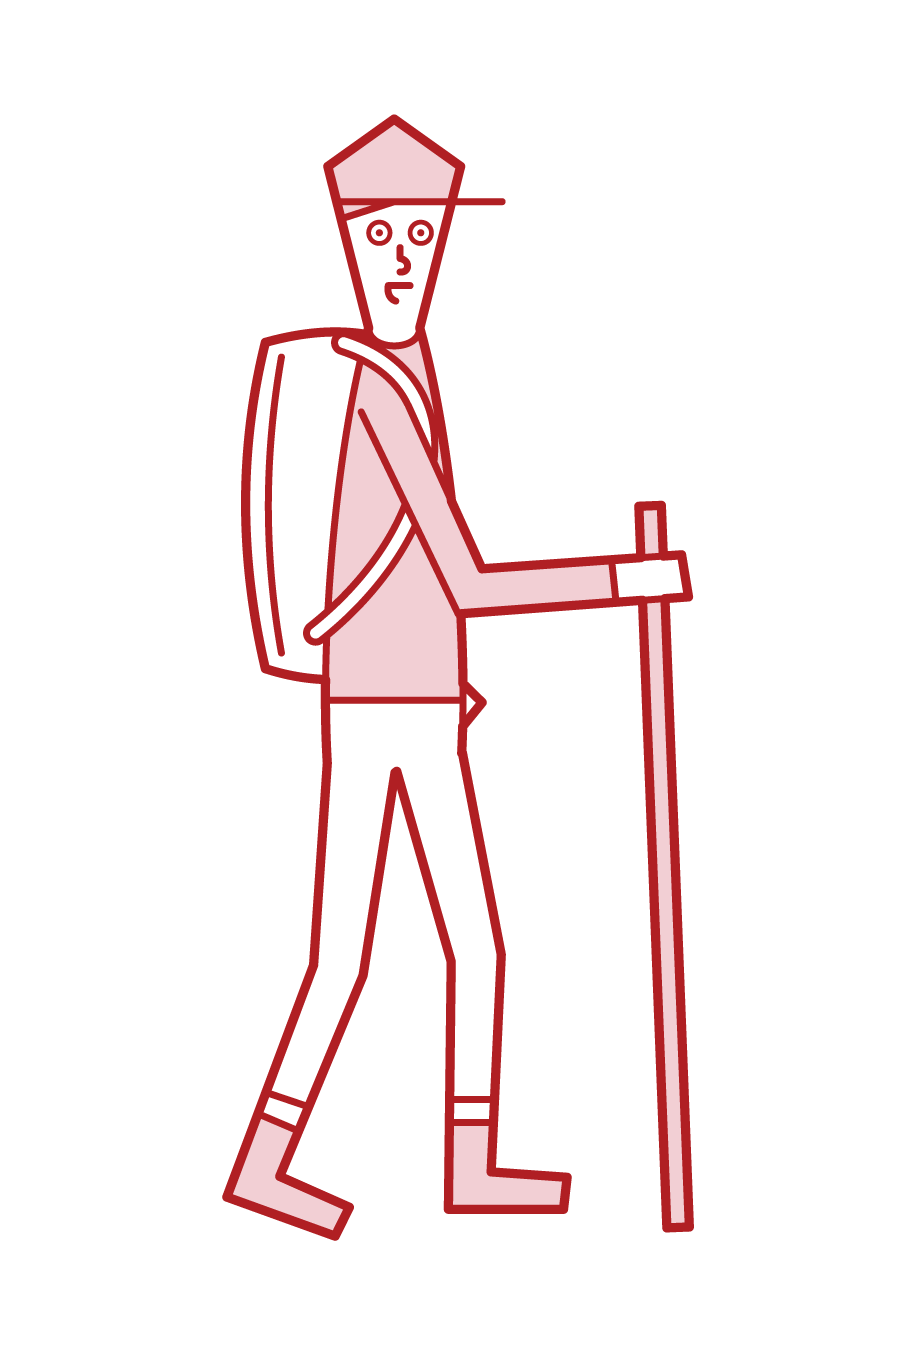 Illustration of a man hiking and climbing a mountain